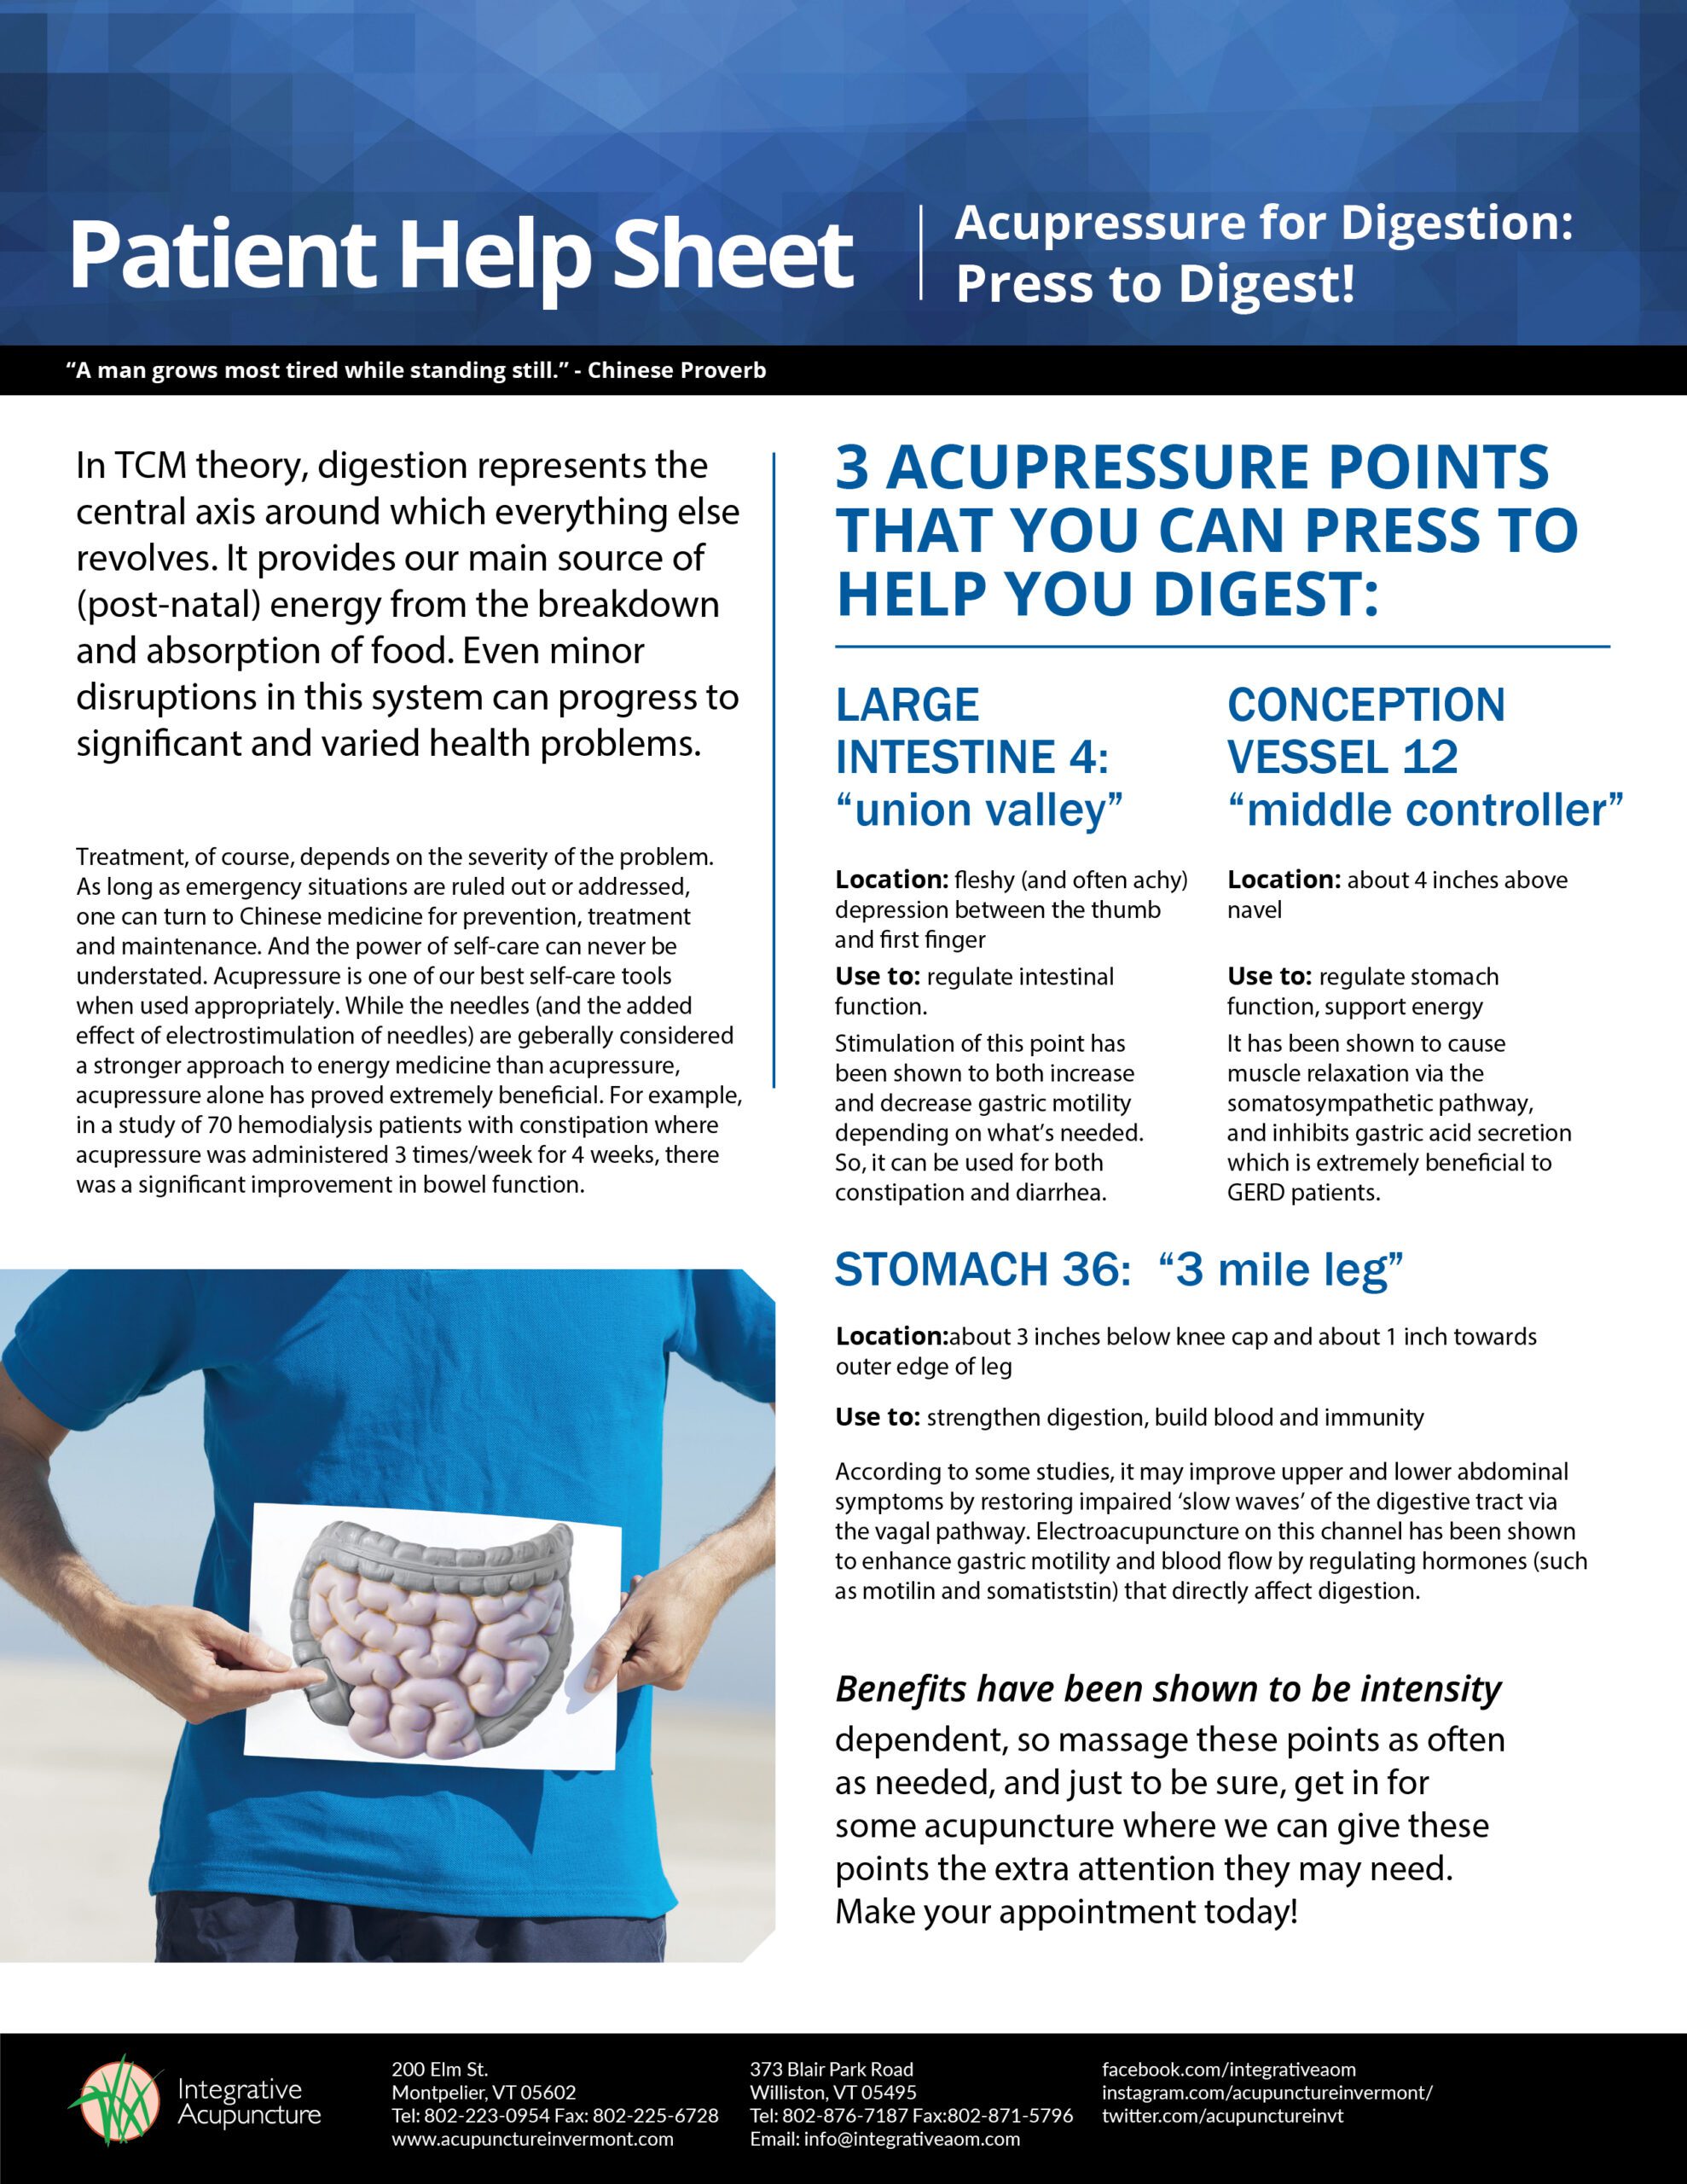 Patient help sheet for digestion